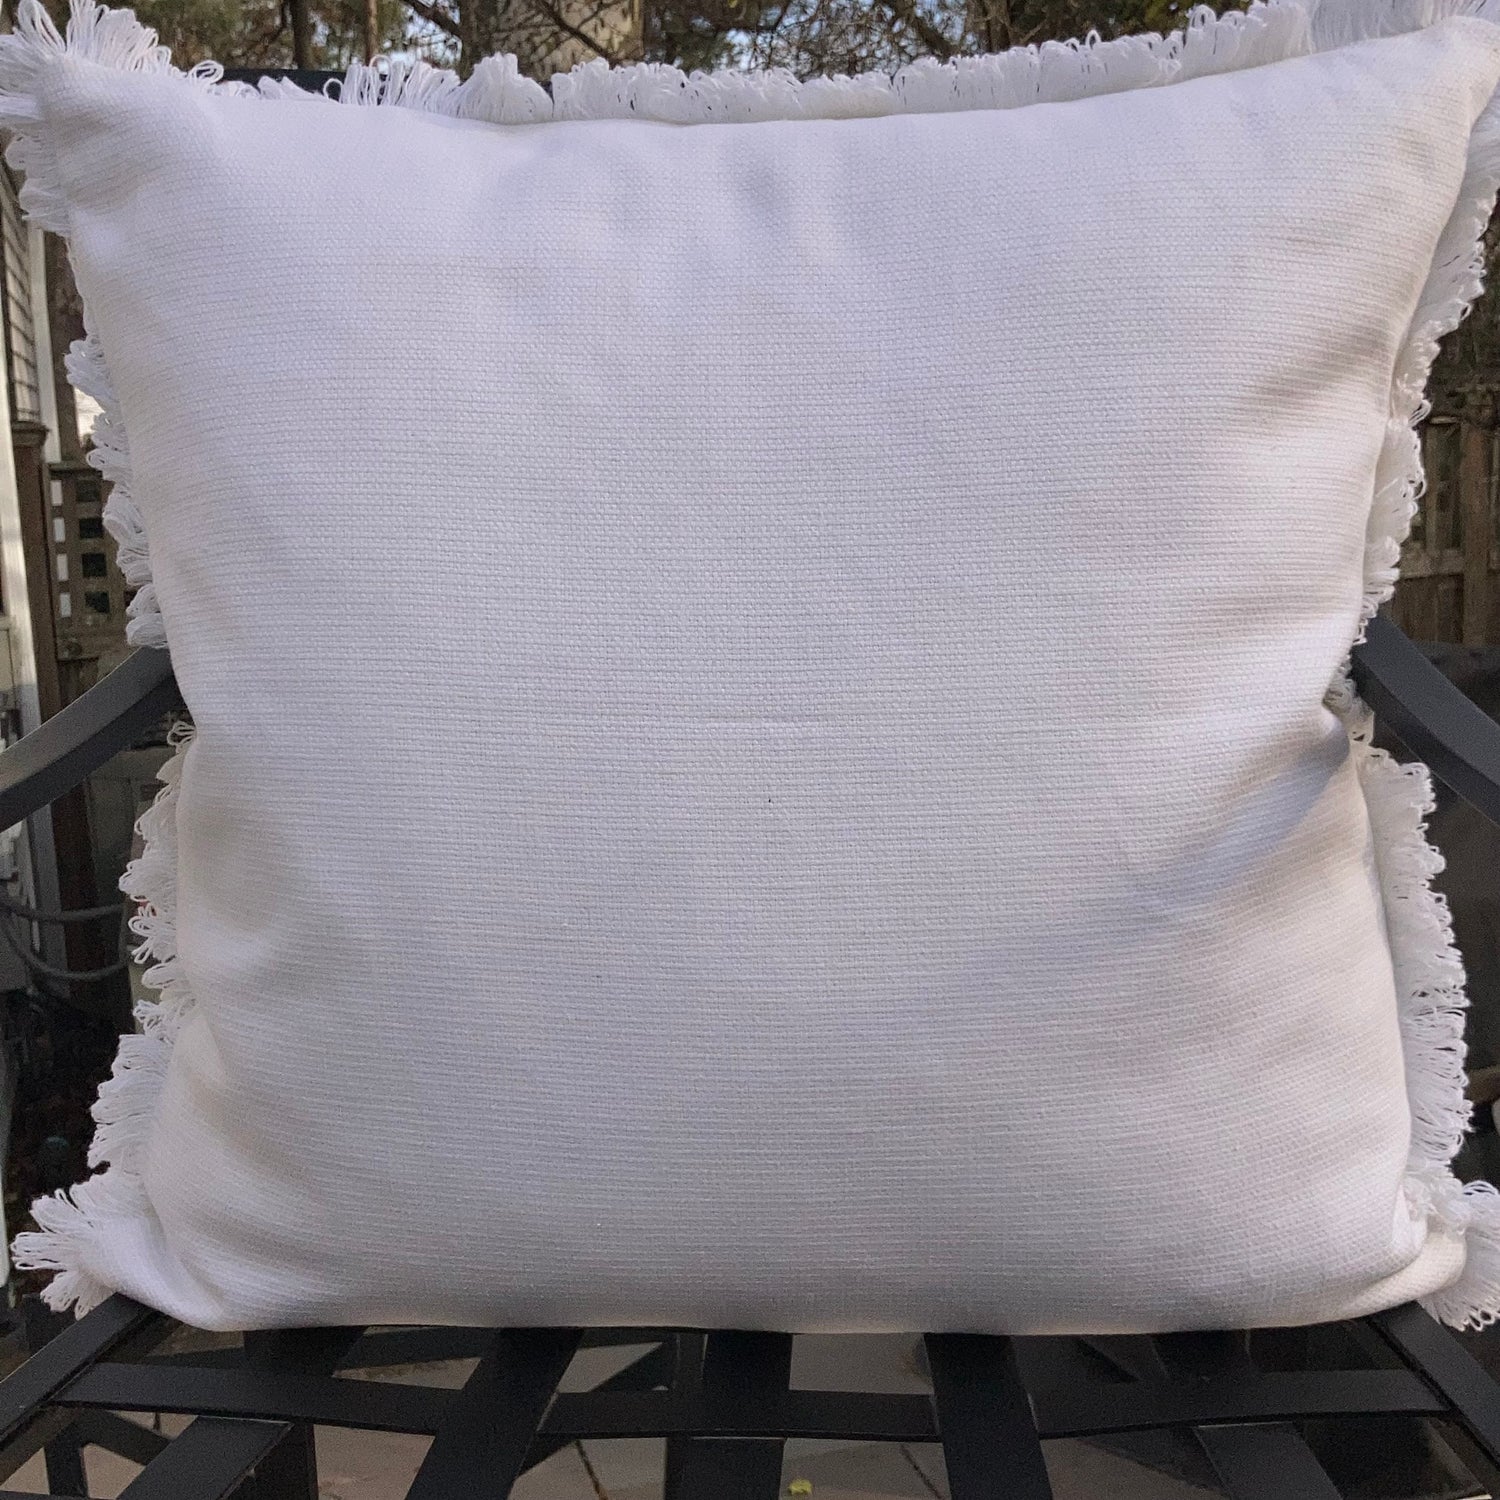 Goa Blue and White Square Designer Pillow Back 22 X 22 Square with Down Feather Insert